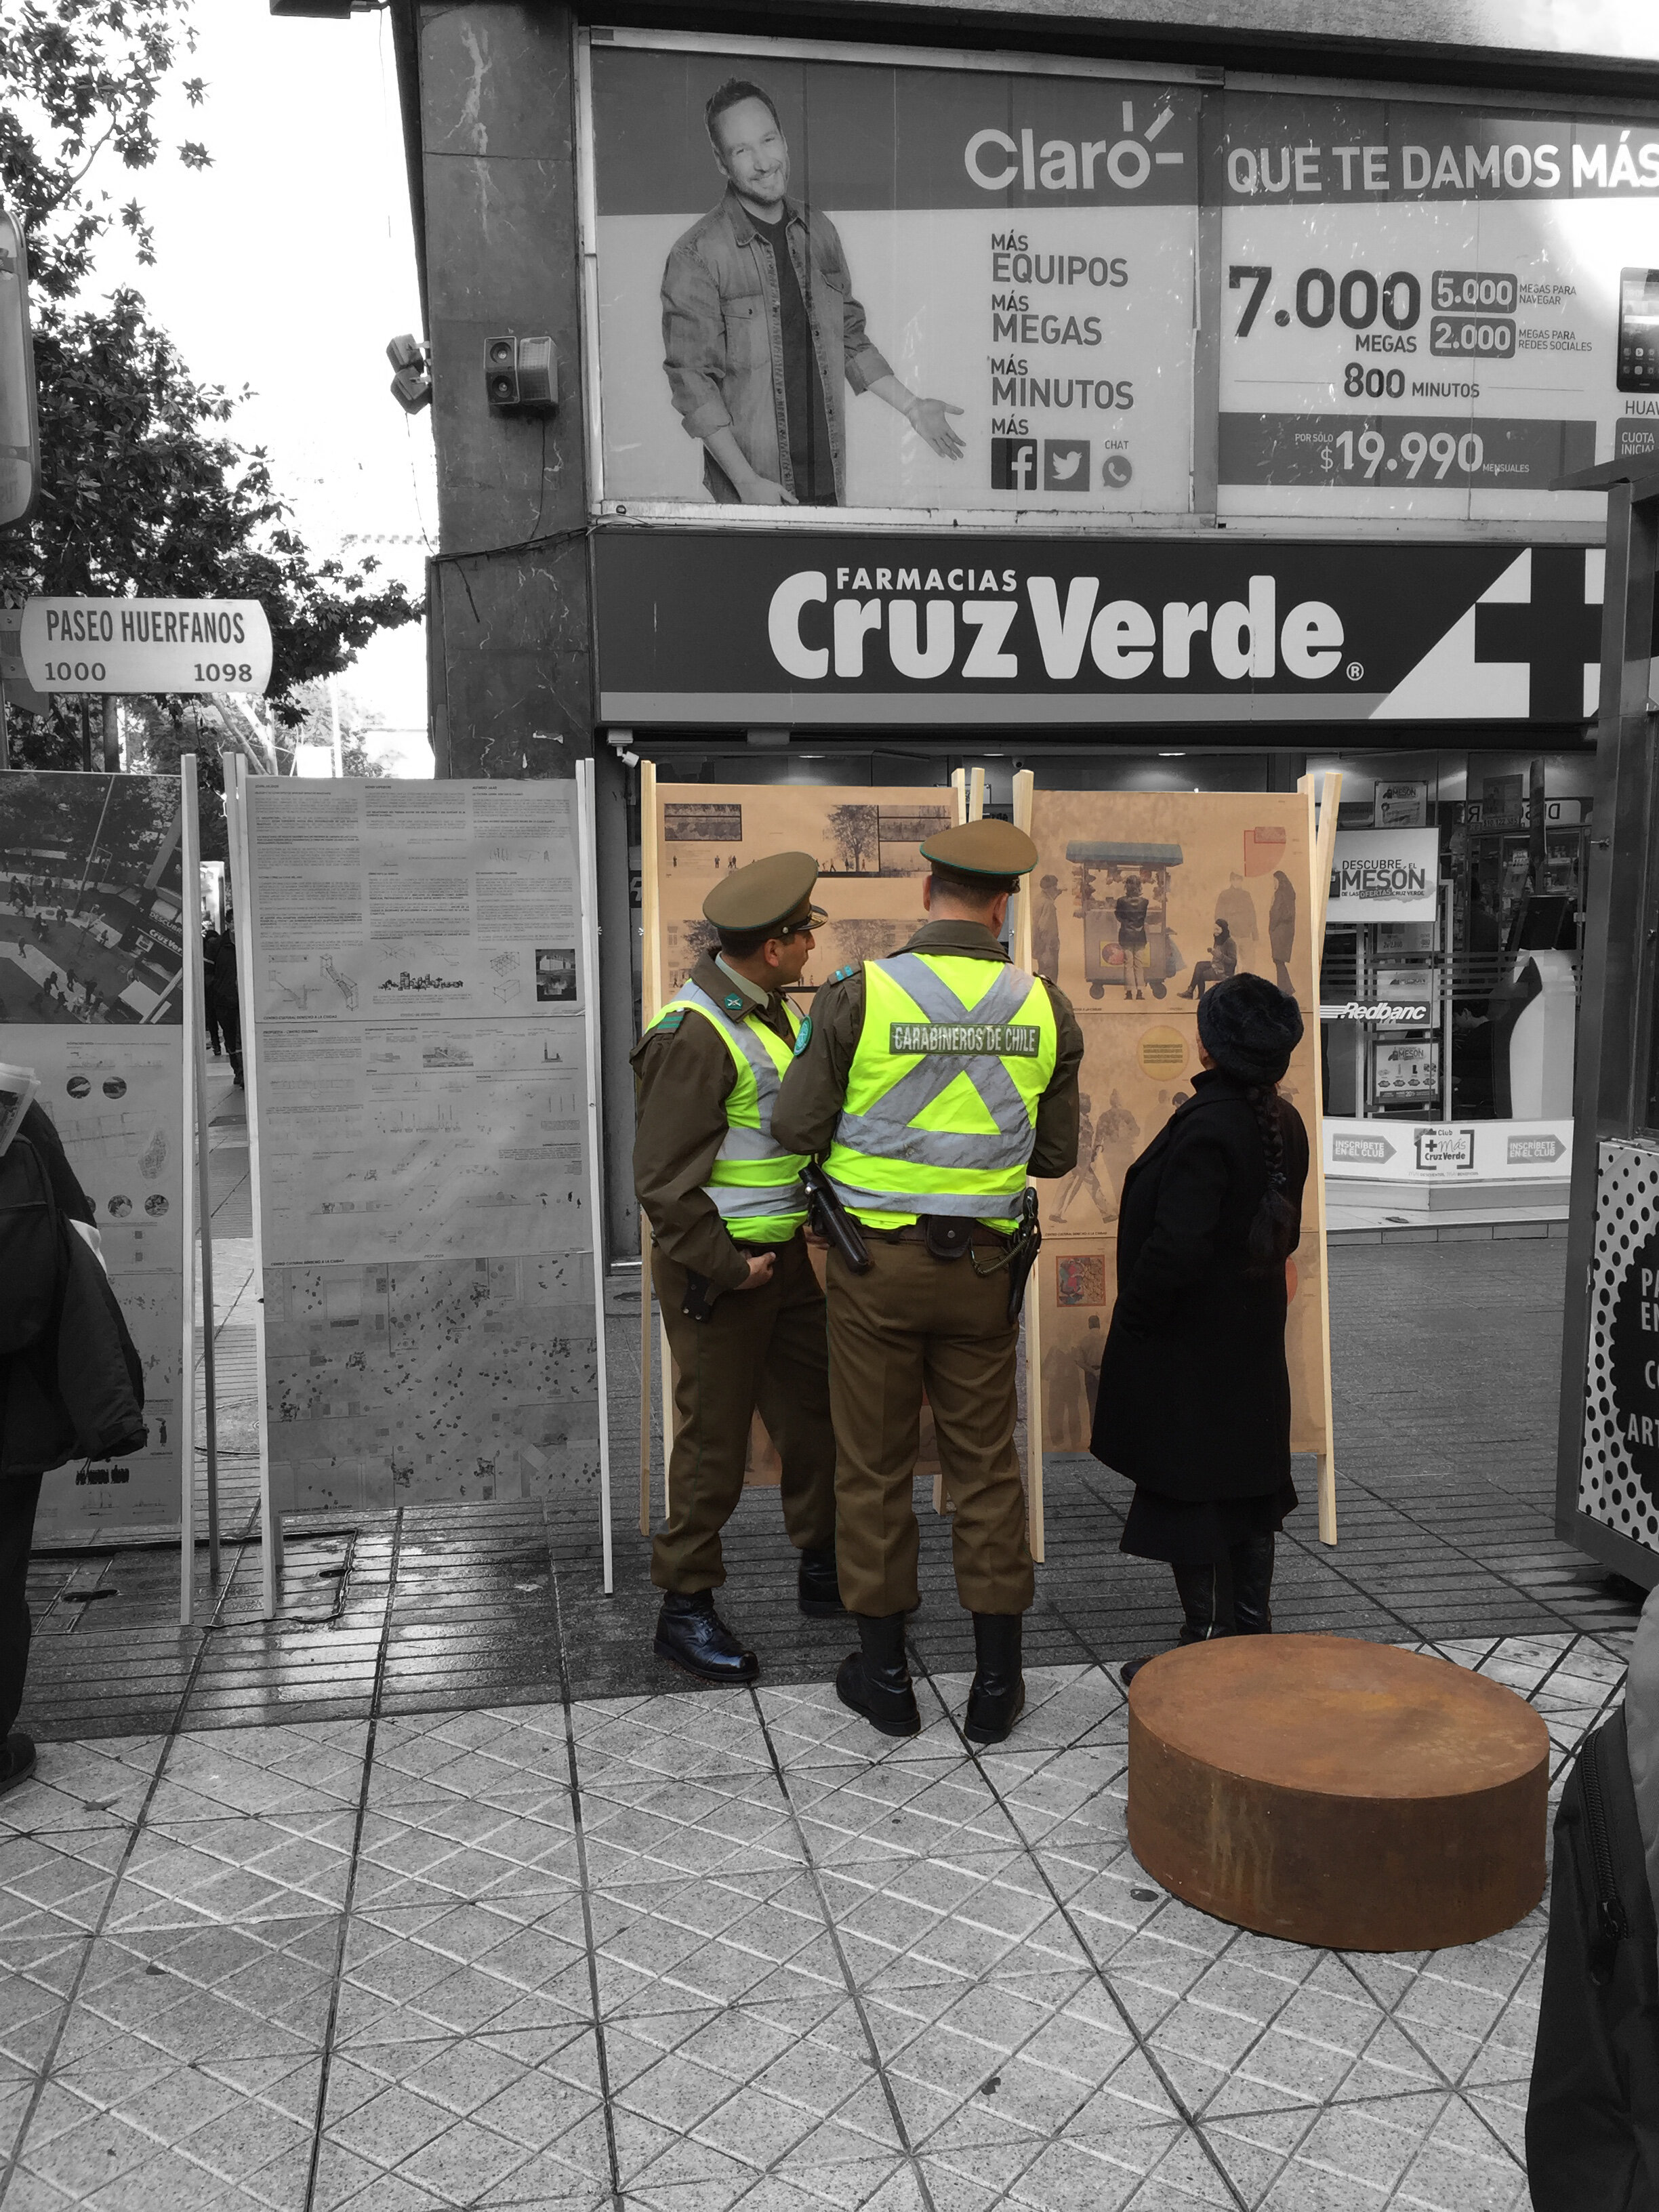 07.22.2016 — In some cases, architecture has the ability to influence and shift—even in an ephemeral way—the social power dynamics of an existing community. The Right to the City Cultural Center intervention was built at the intersection of the two busiest pedestrian walkways in downtown Santiago without any formal permit. Police officers are supposed to take down appropriations of public space that aren’t formally authorized; here, instead, police converse with passerby, explaining rather than dismantling the intervention. This image is evidence of the potential for architectural interventions to create novel social interactions.